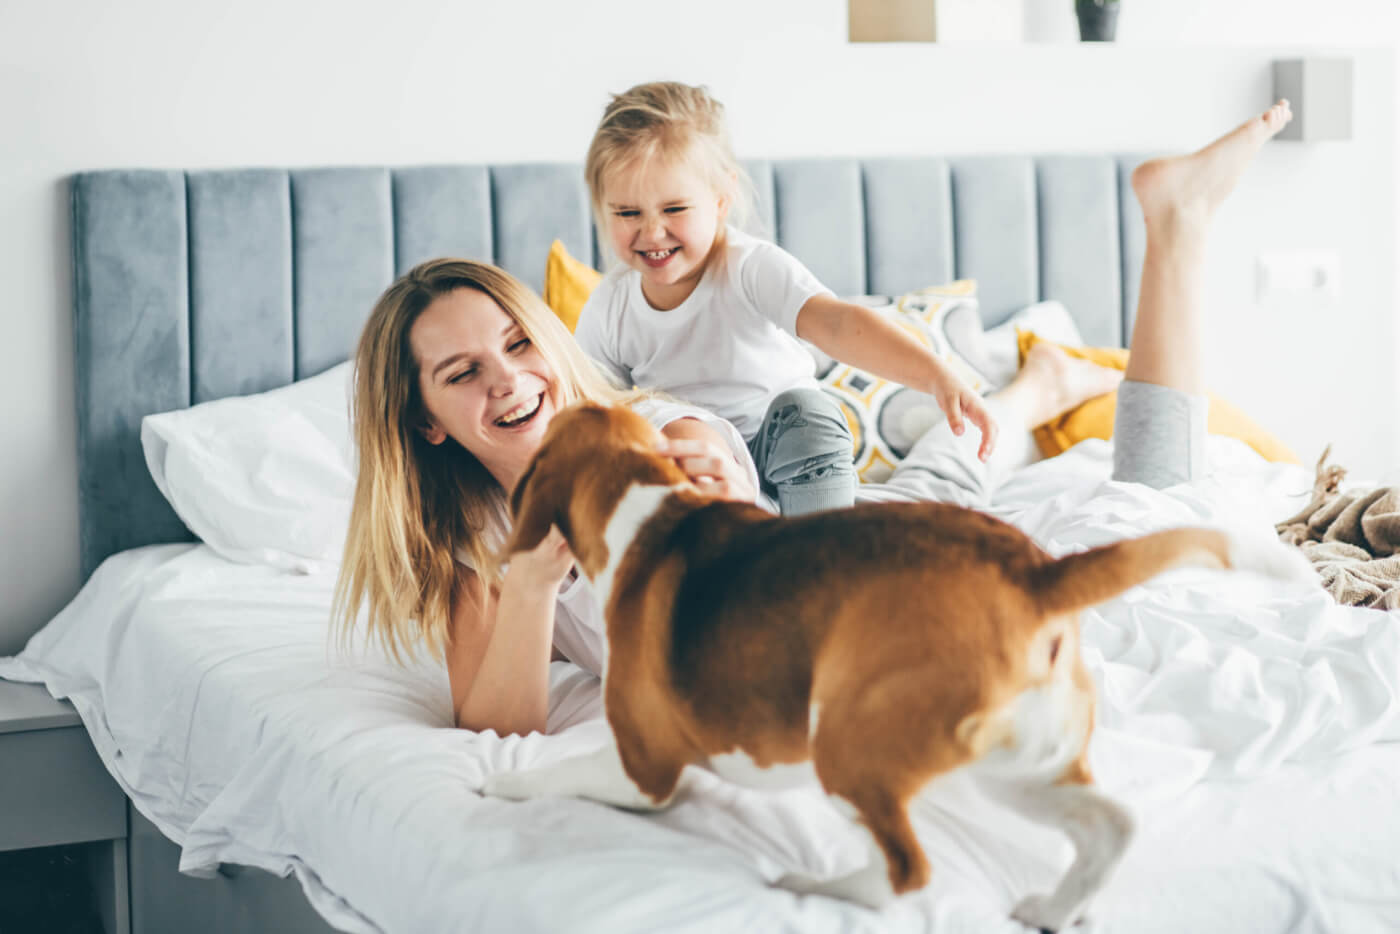 Happy mother and daughter with dog having fun and playing together on the bed at home